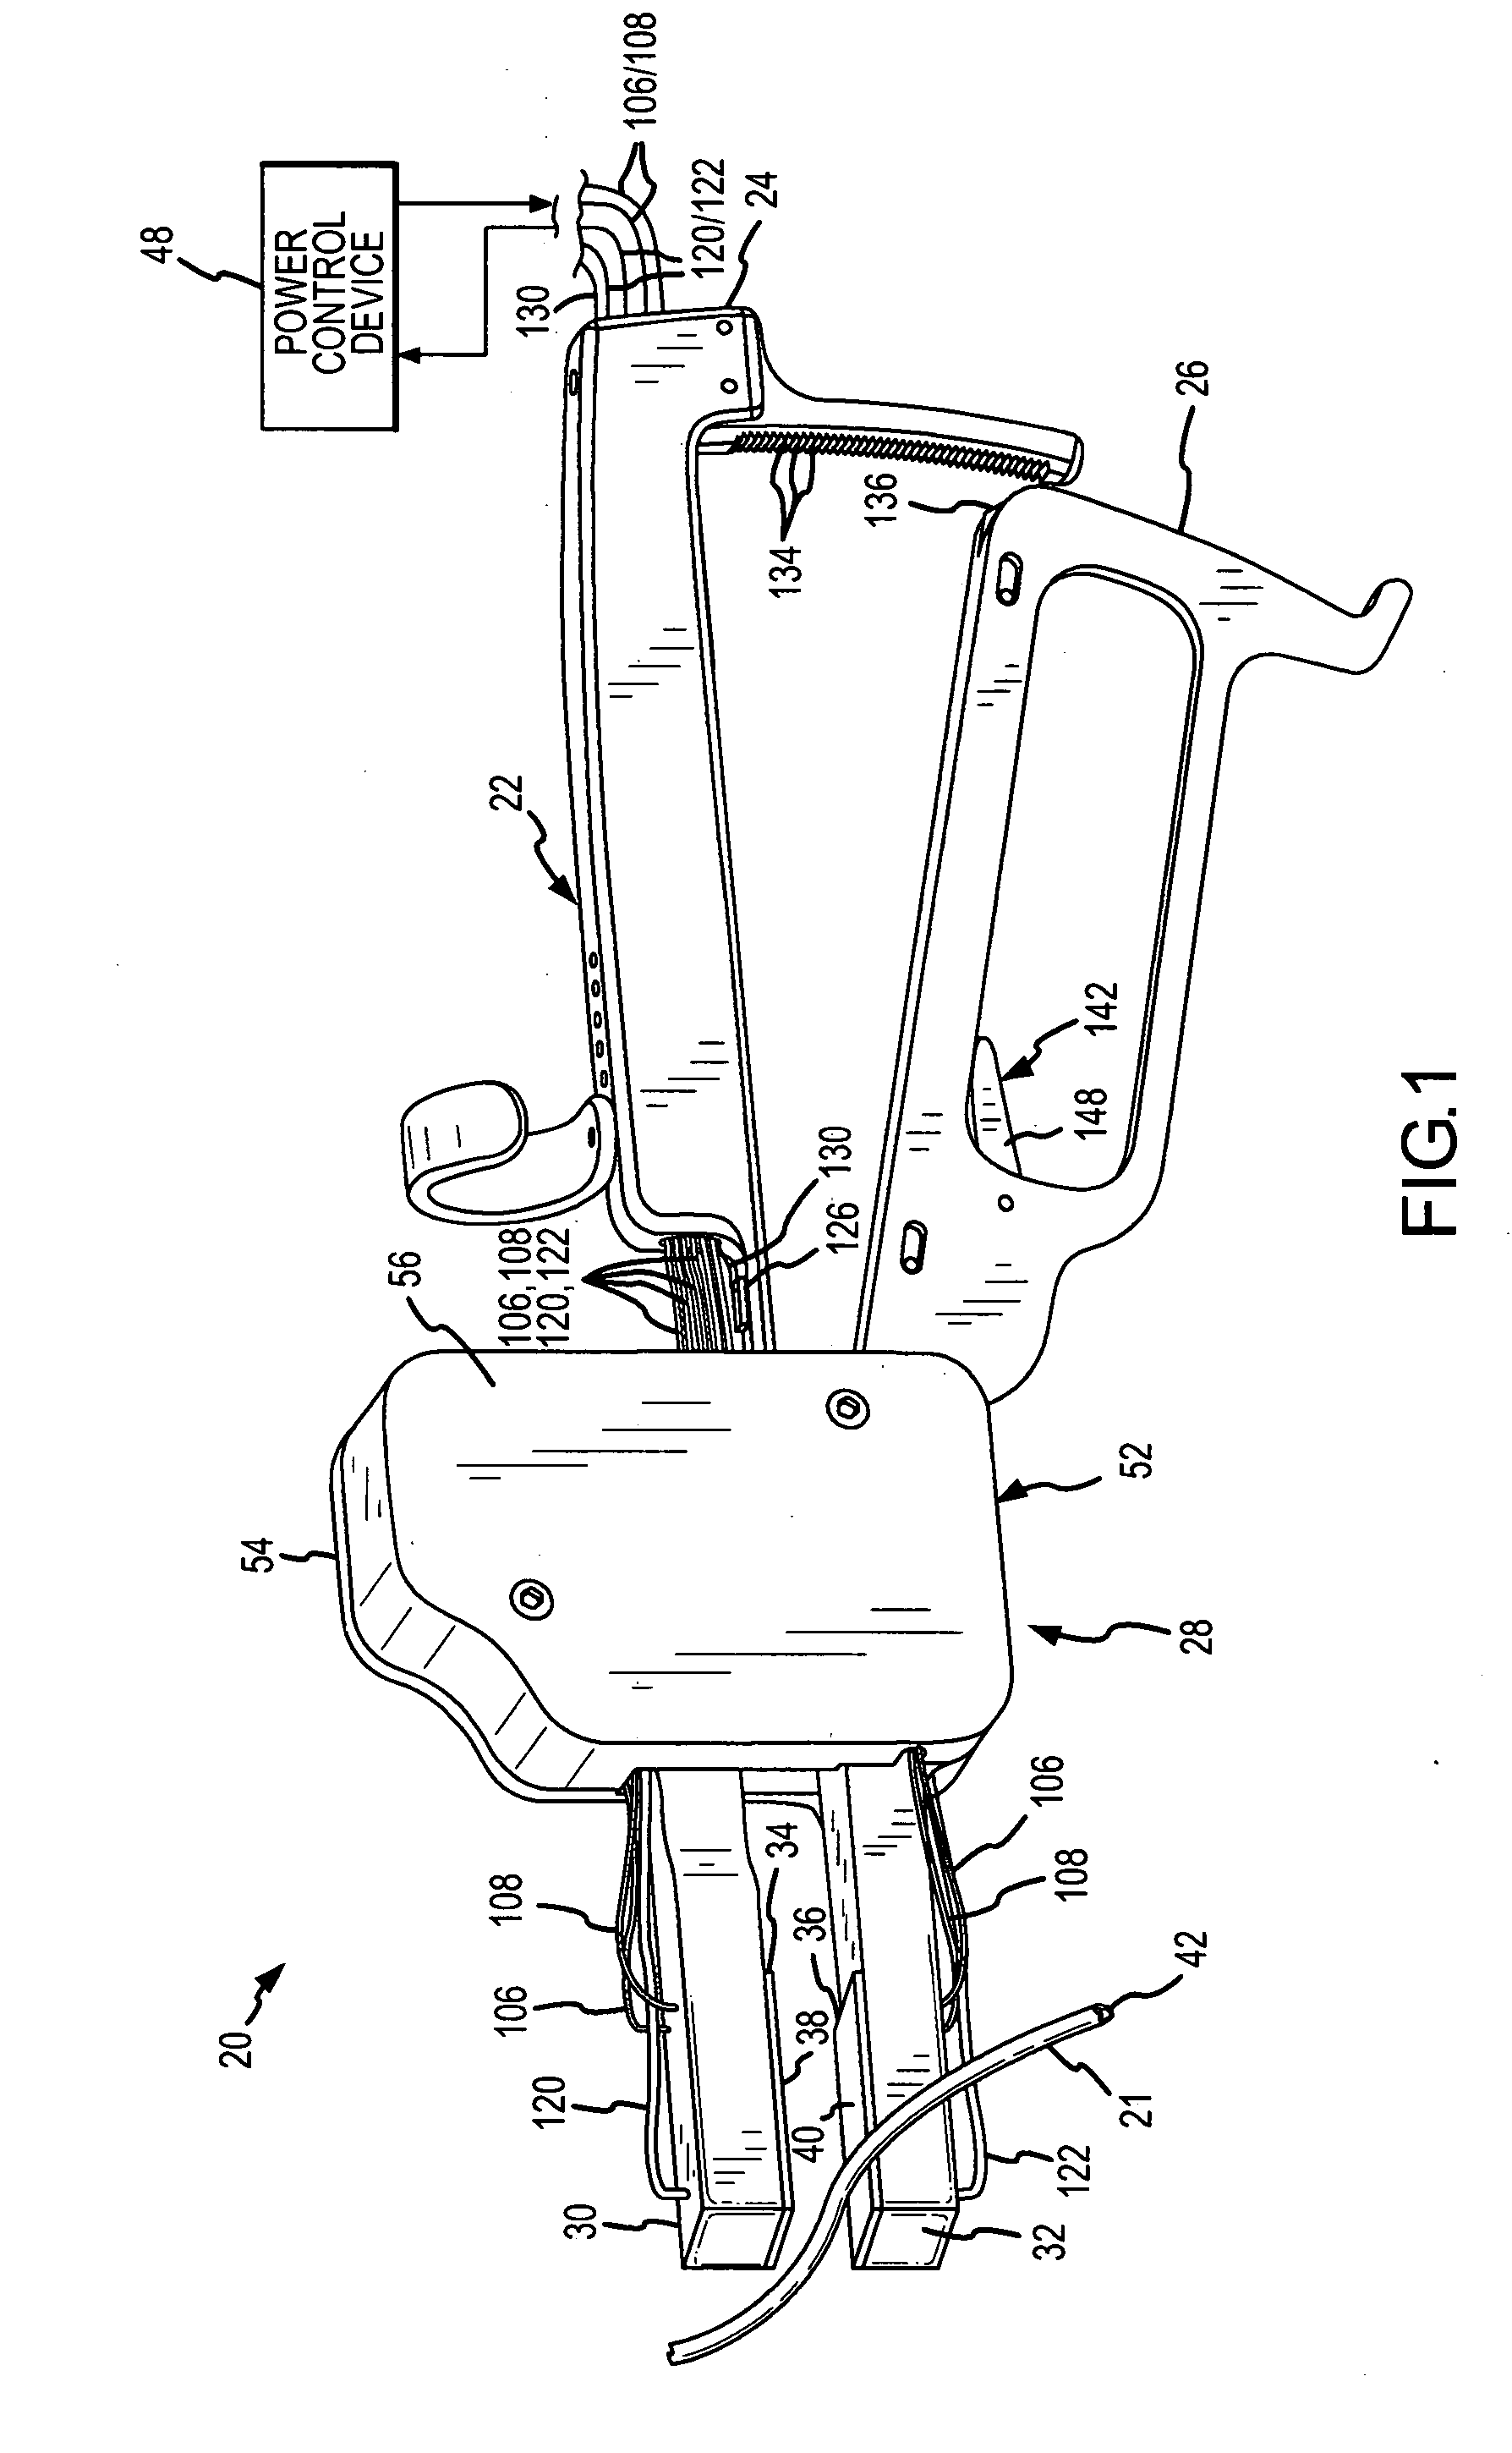 Apparatus and method for rapid reliable electrothermal tissue fusion